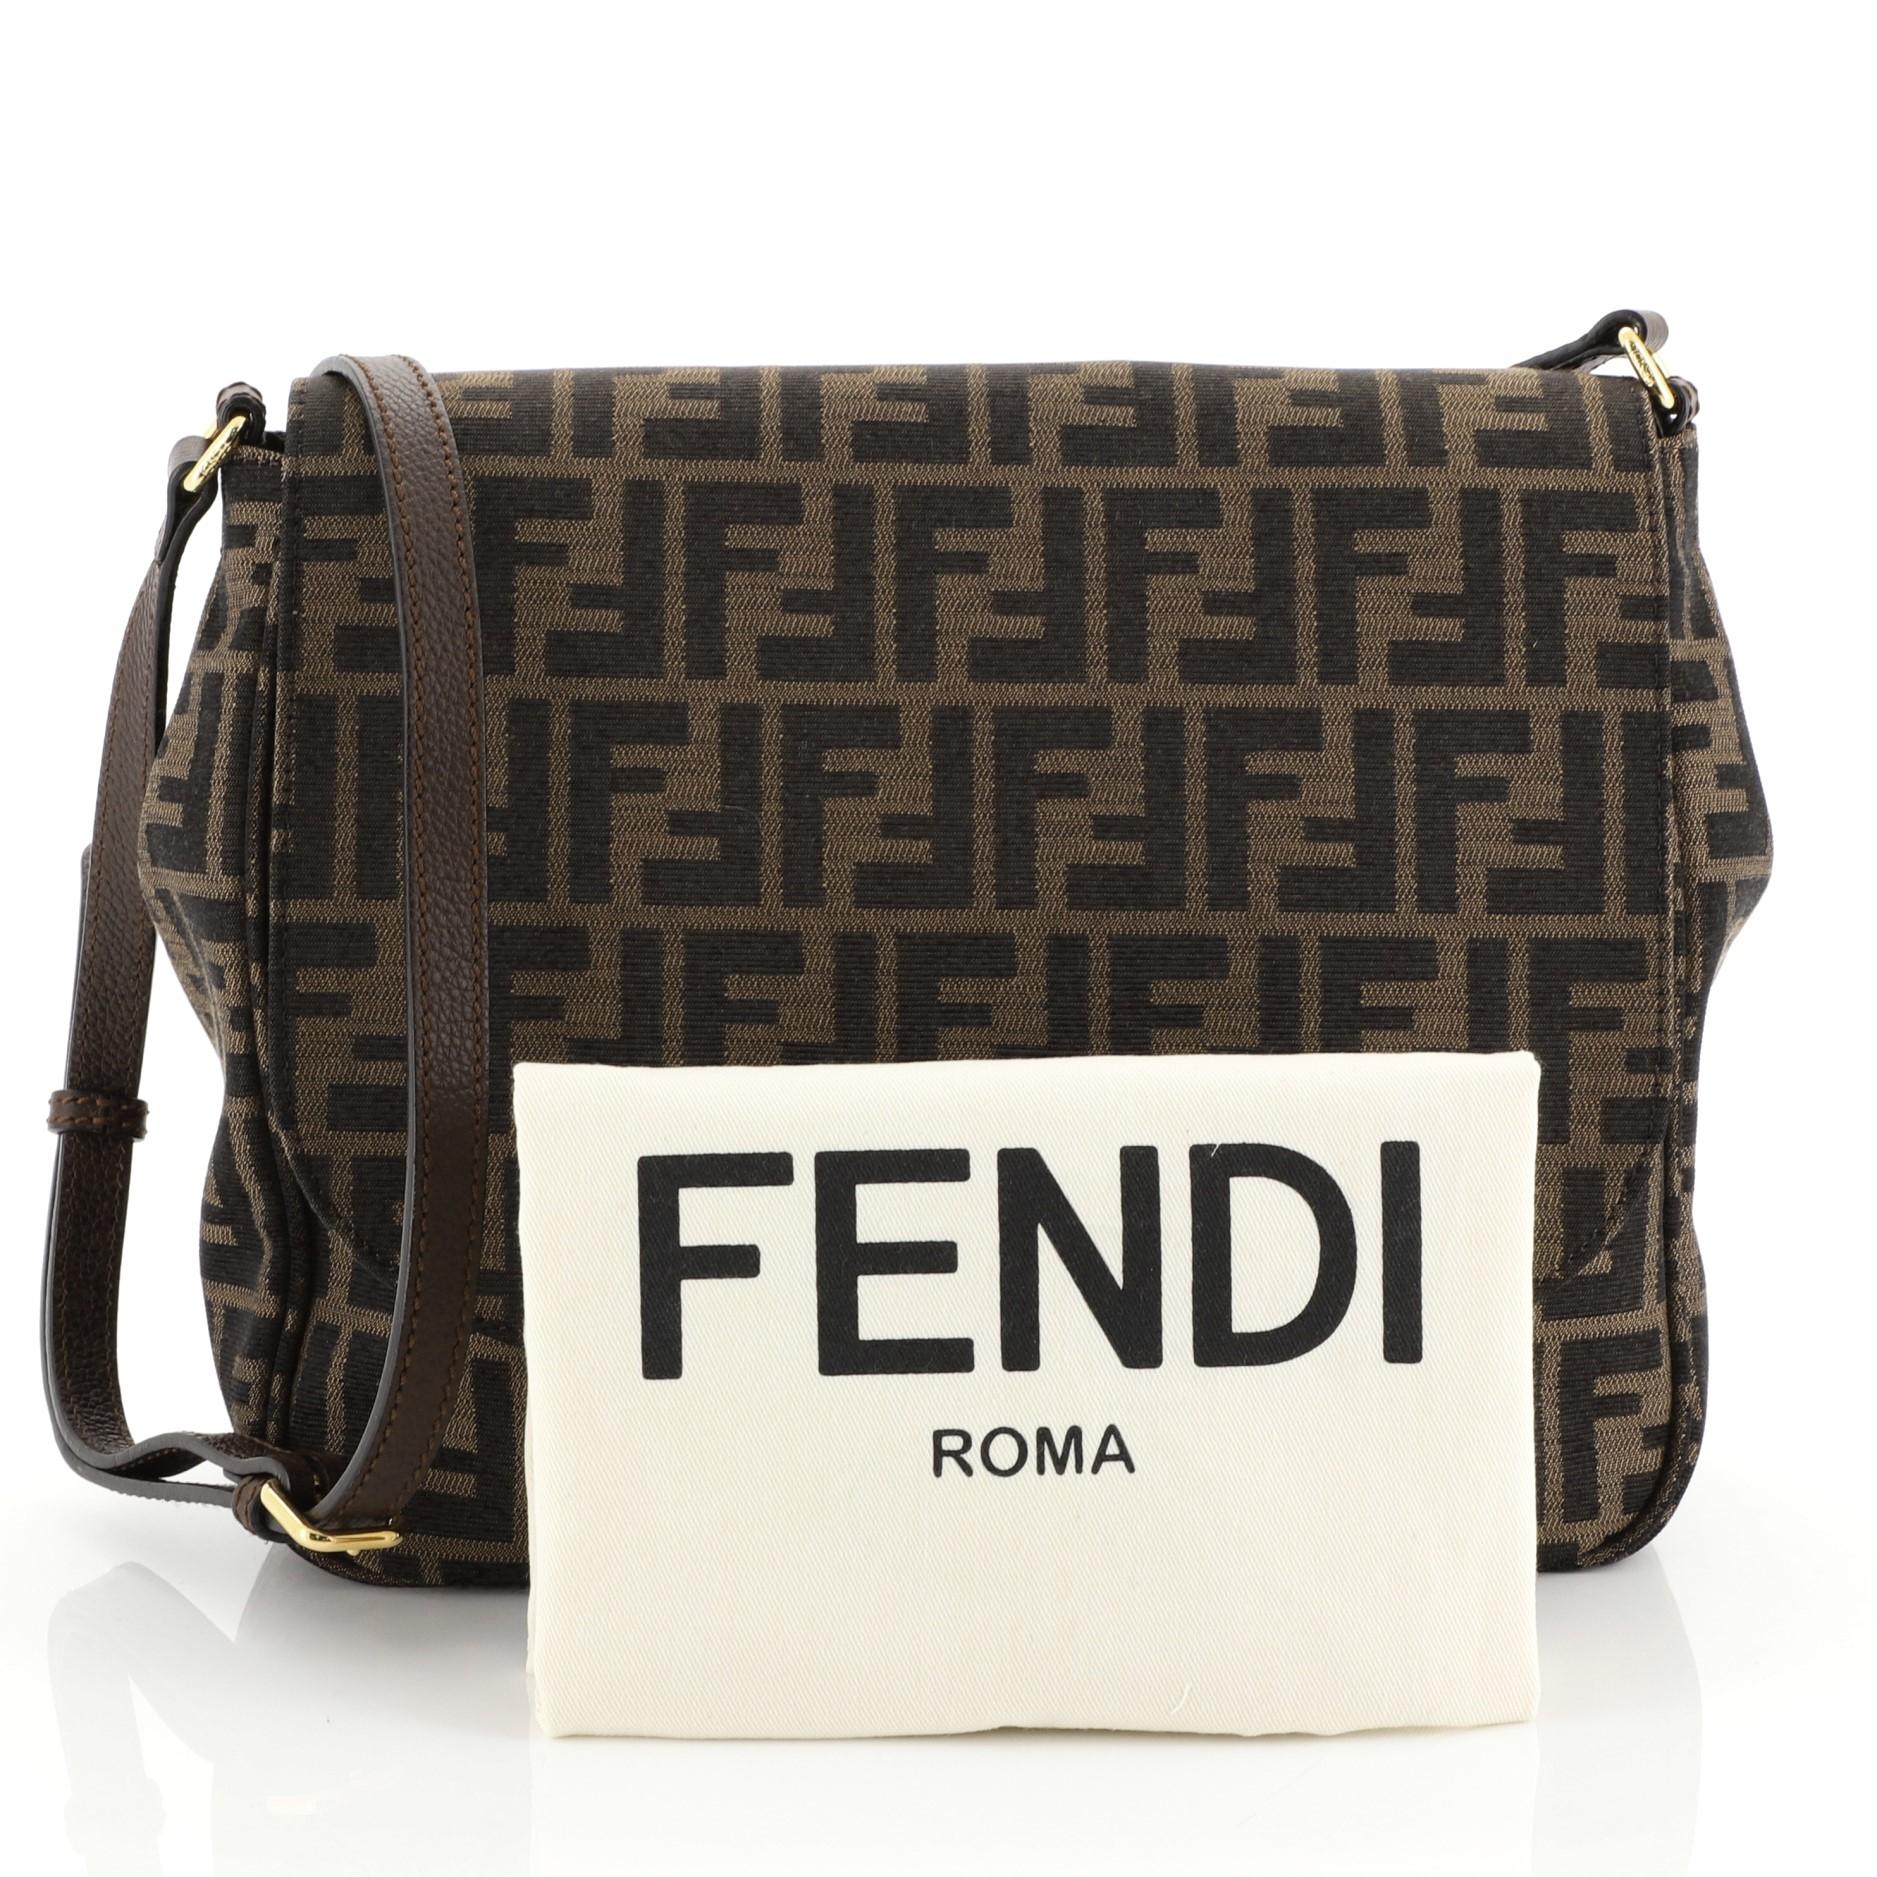 This Fendi Flap Crossbody Bag Zucca Canvas Medium, crafted from brown zucca coated canvas, features an adjustable strap, frontal flap, exterior slip pocket and gold-tone hardware. Its magnetic snap closure opens to a black fabric interior with slip